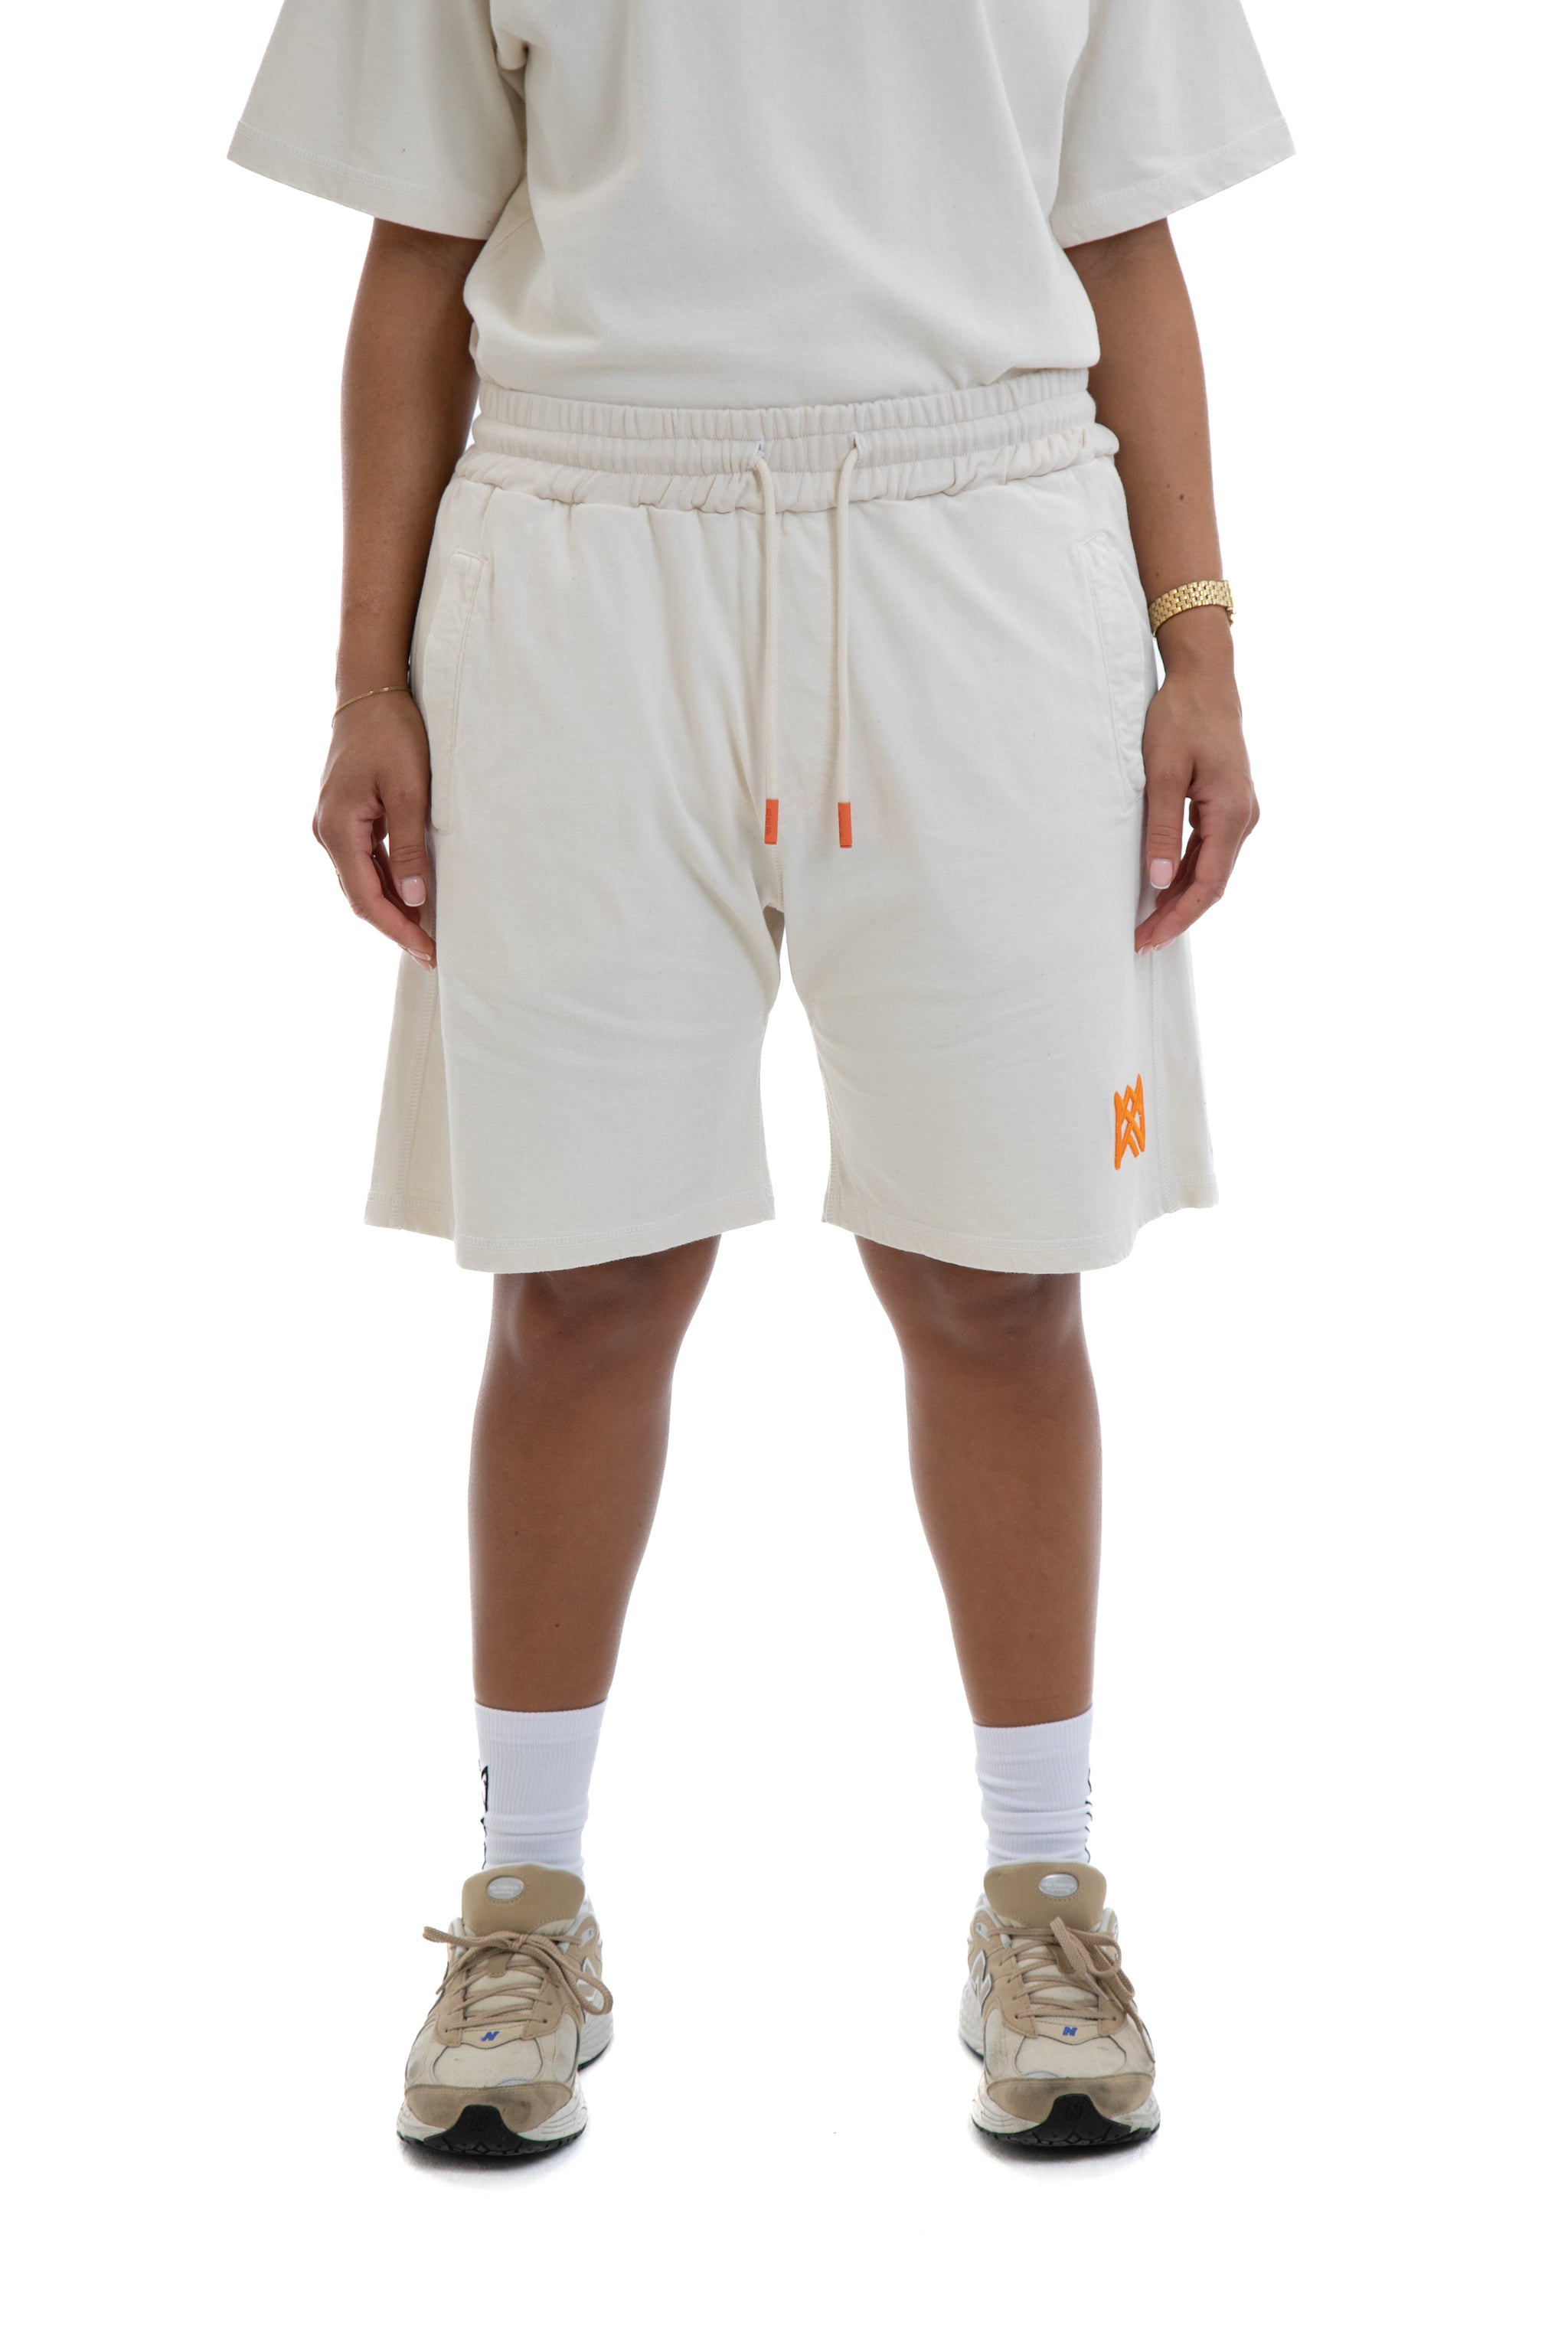 Heir Oversized Shorts Off White - RealArtisticPeople